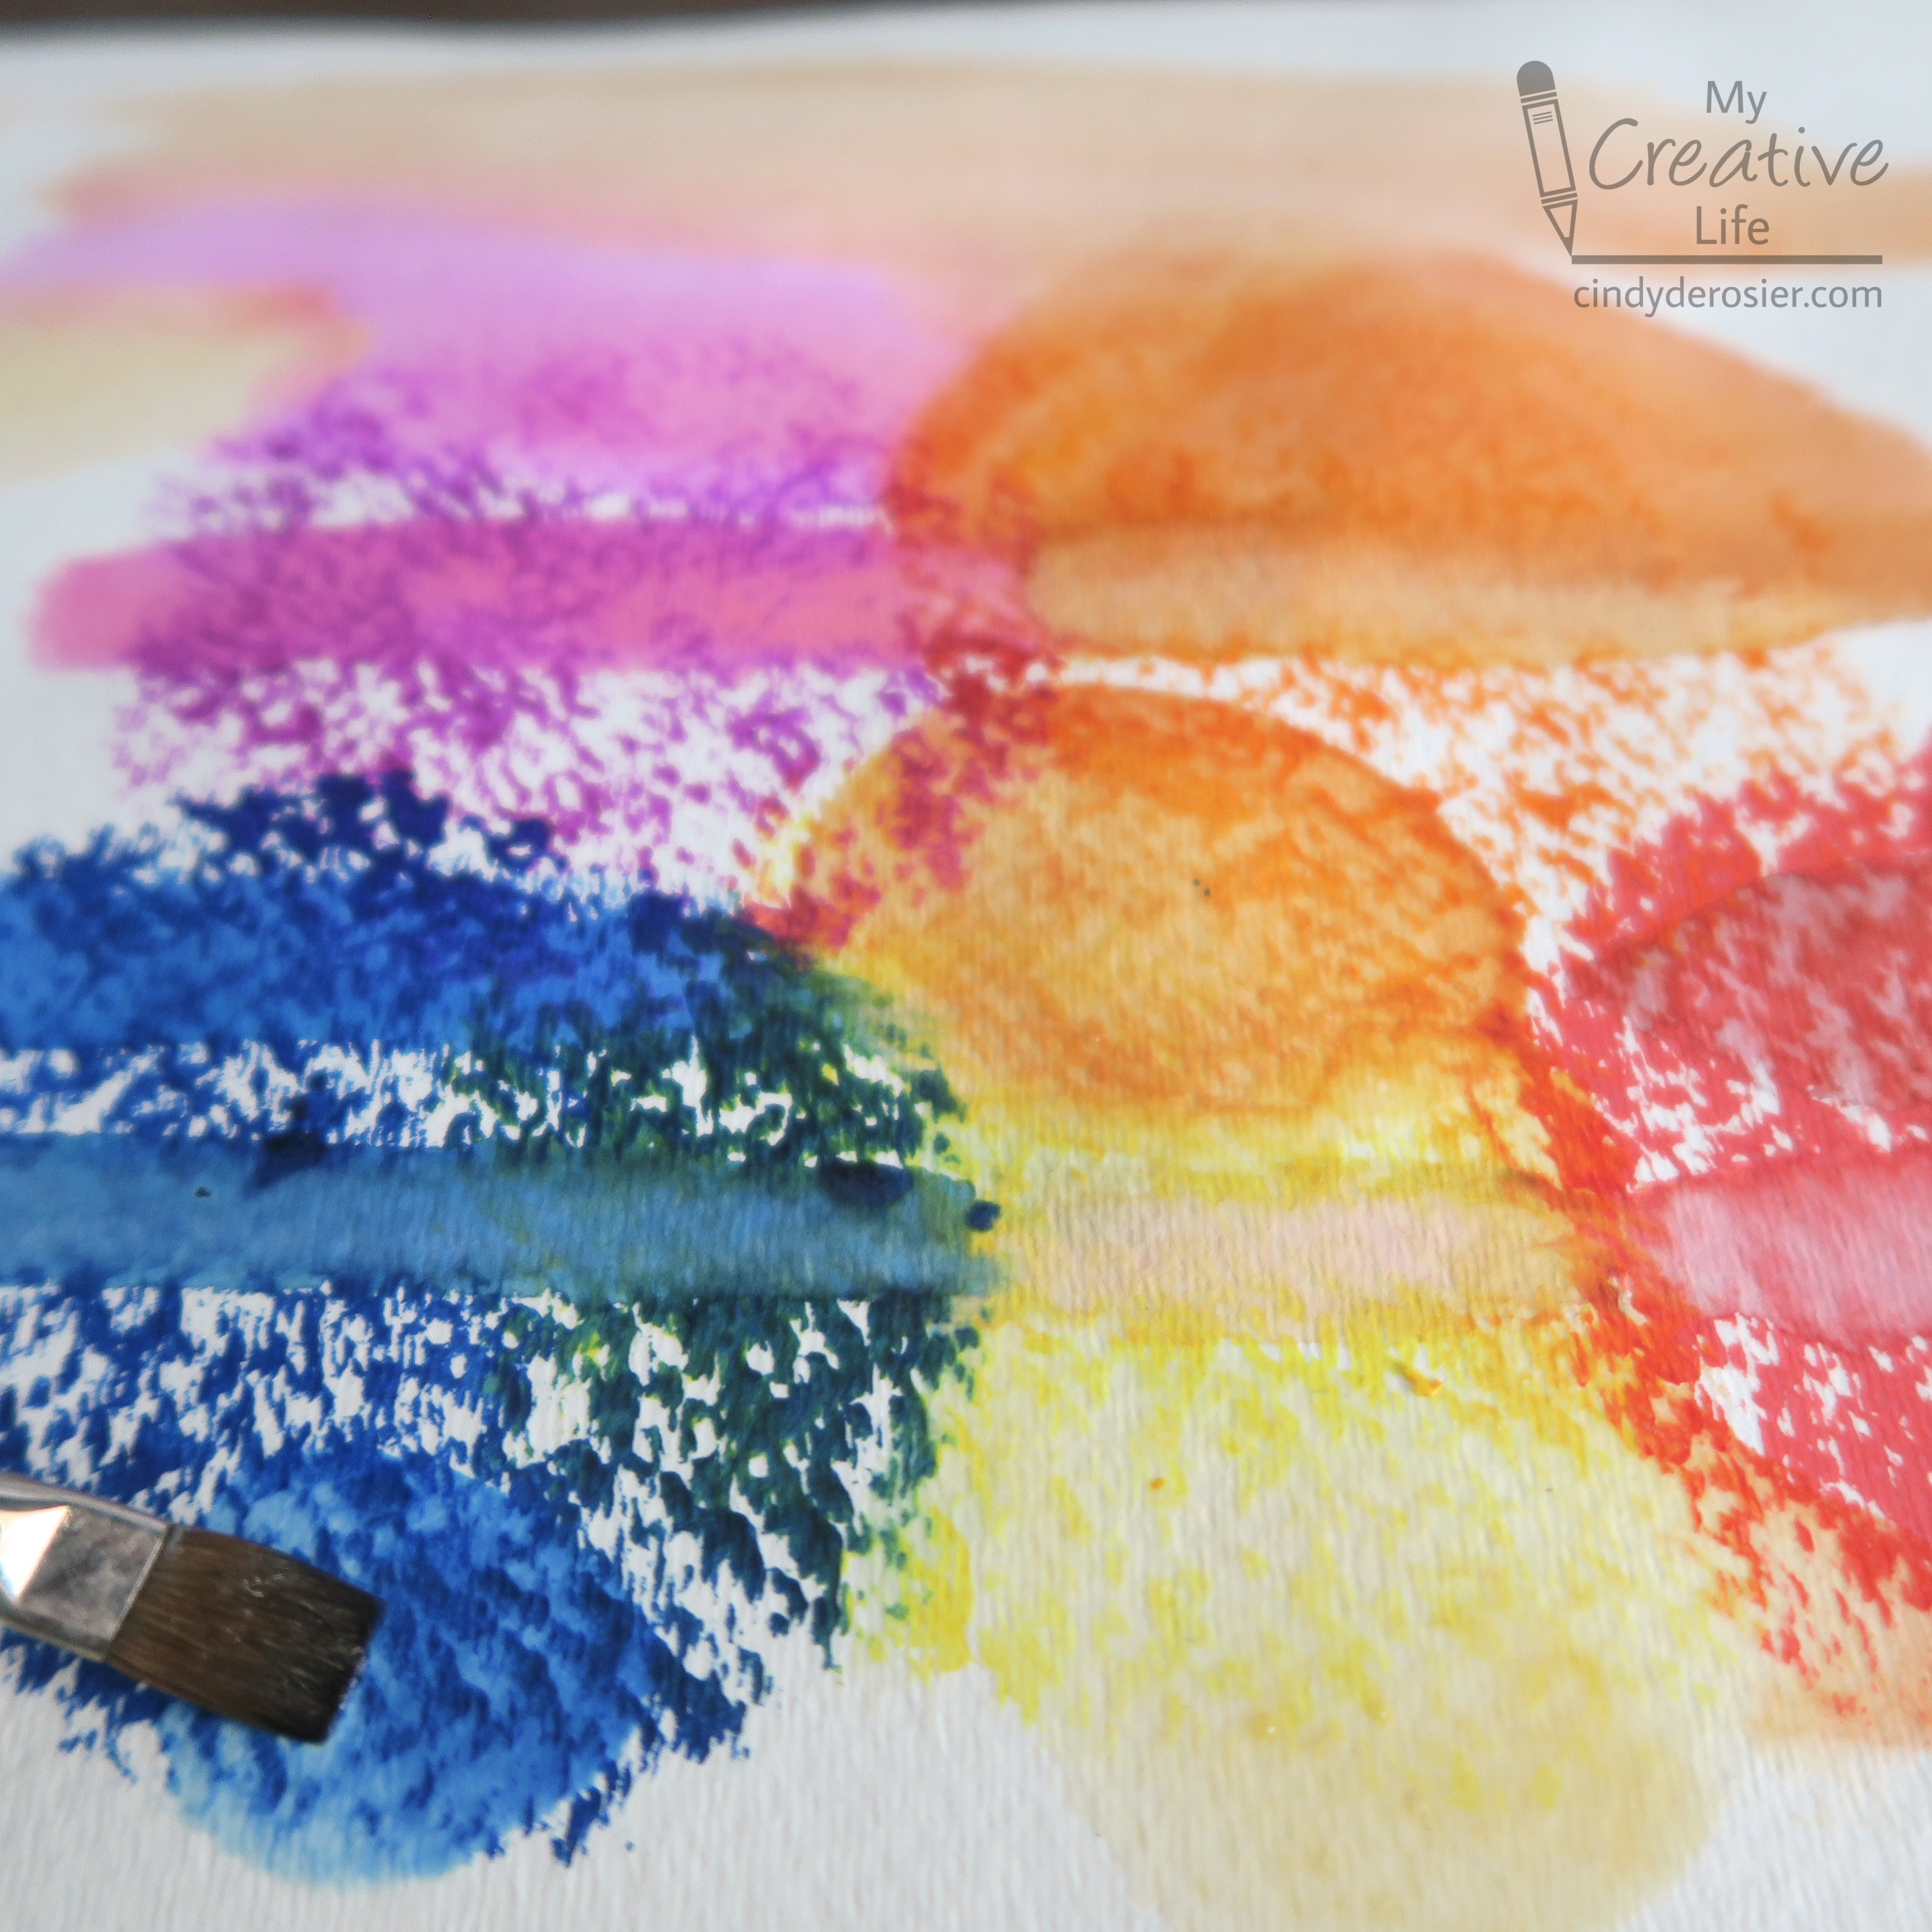 Paint sticks art materials fun and easy for children and toddlers. — Harbor  Creative Arts